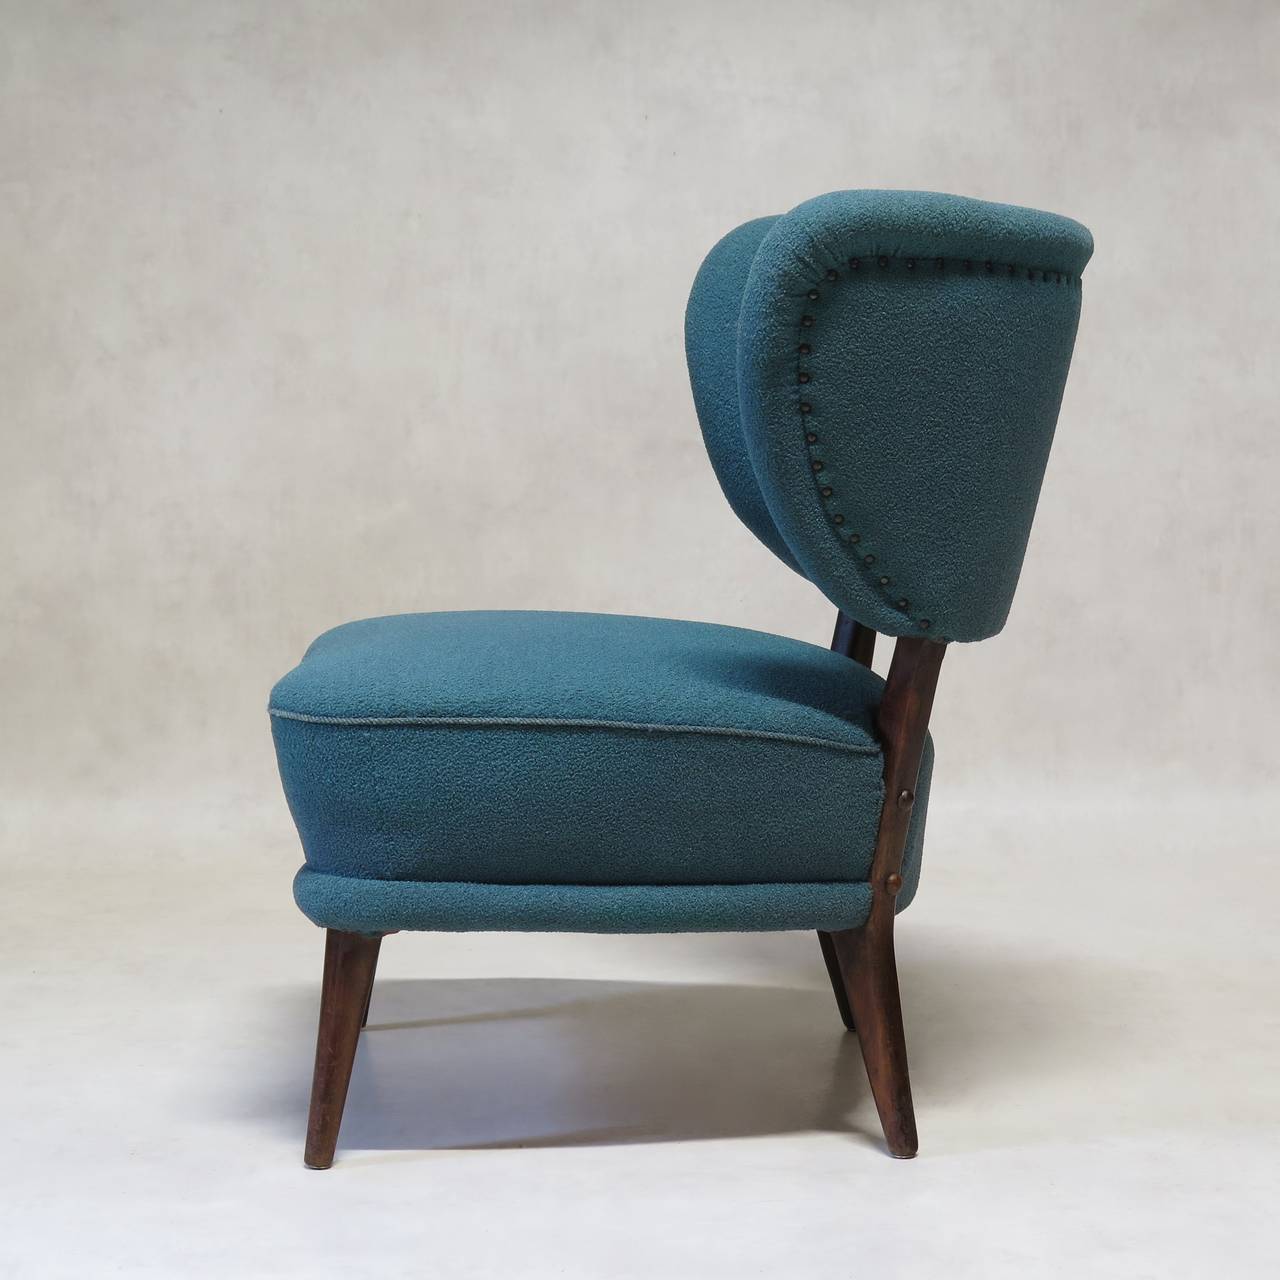 Mid-20th Century Pair of Mid-Century Modern Wingback Slipper Chairs For Sale